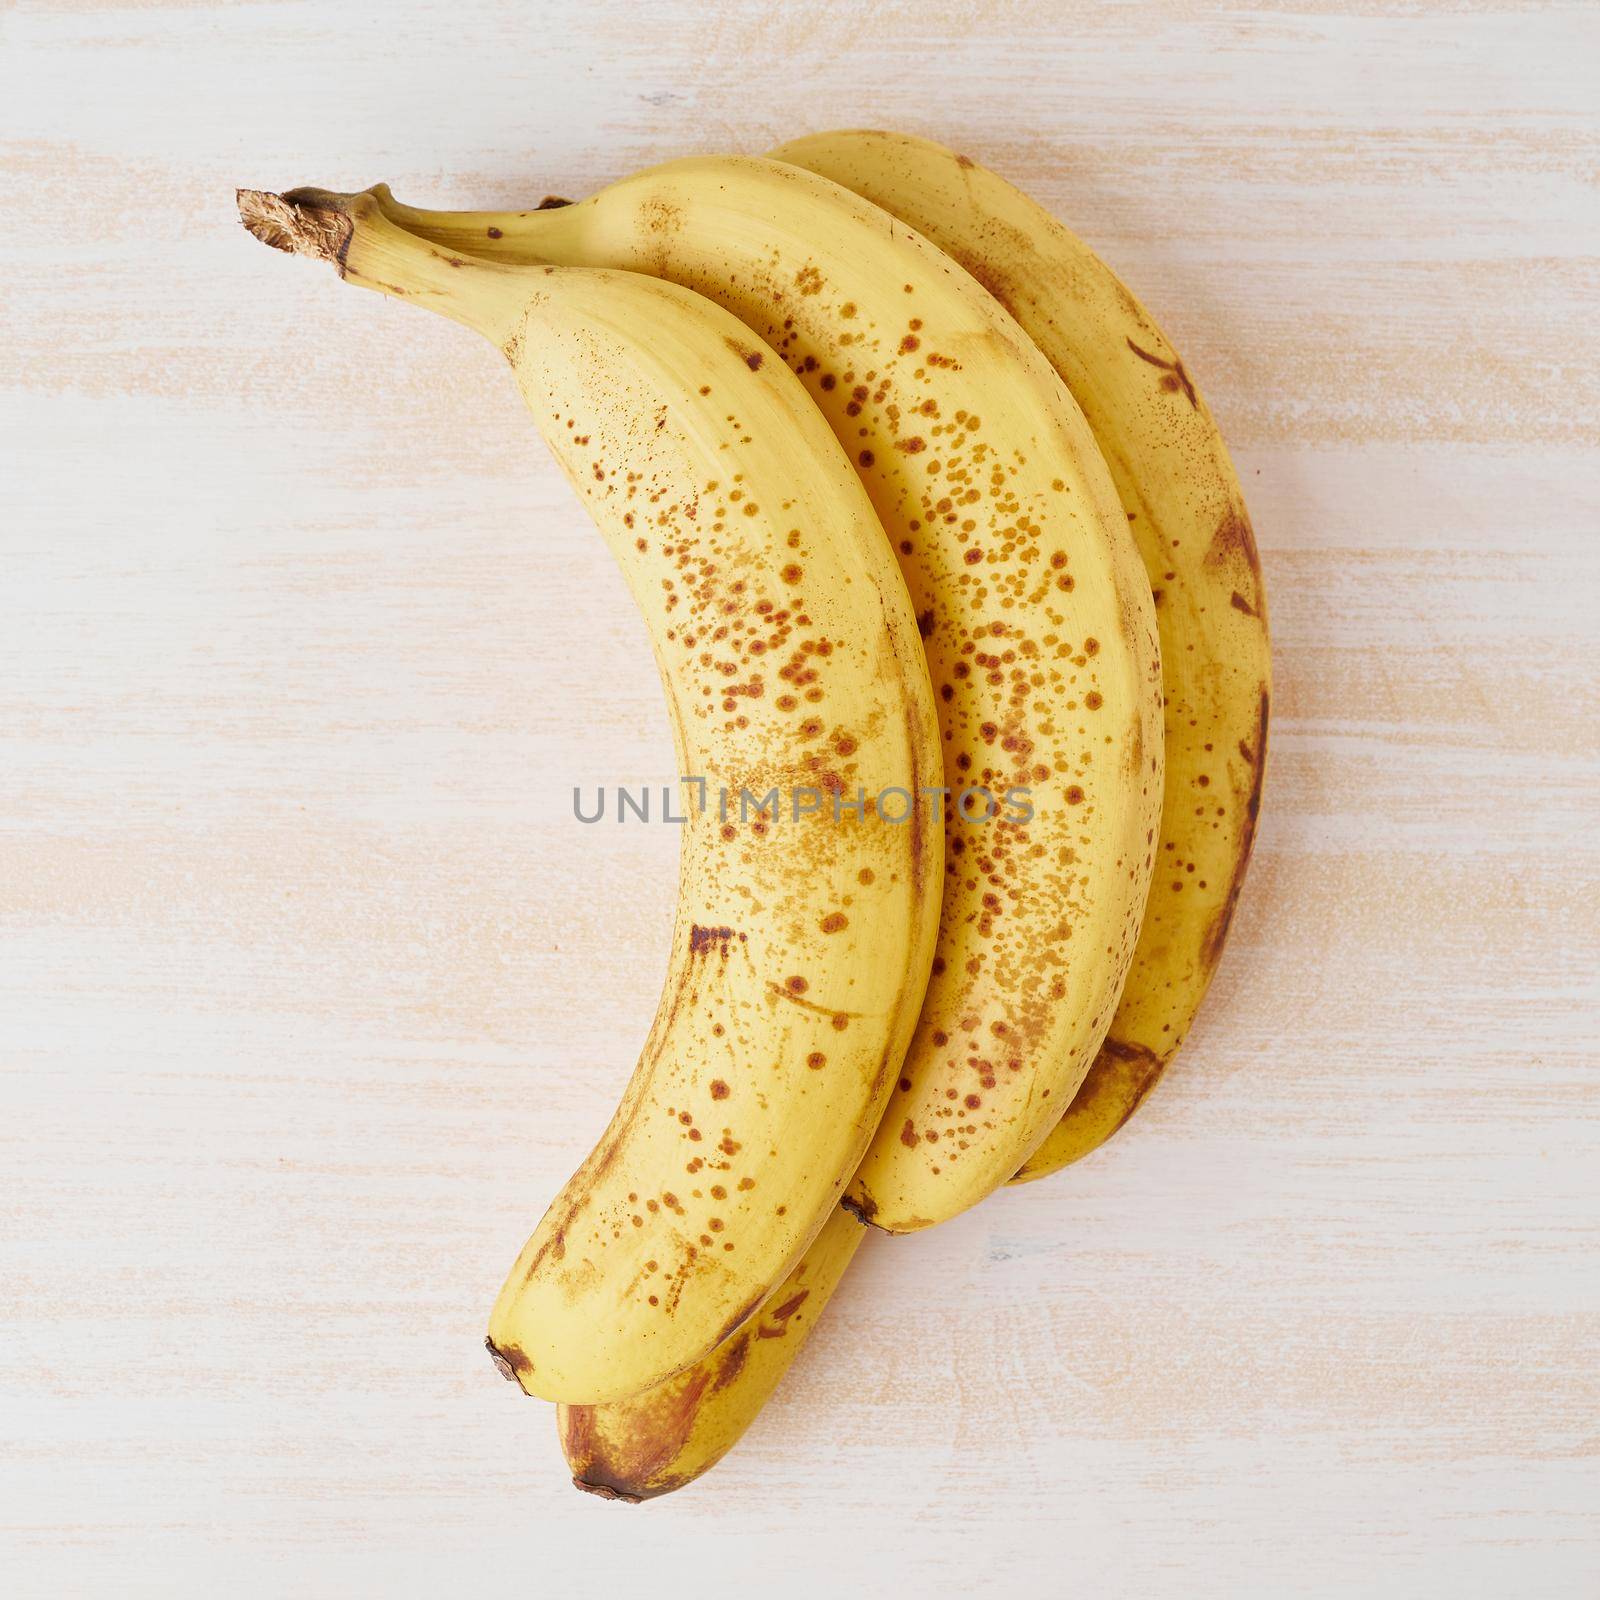 Ripe bananas with brown spots on a bright white wooden table